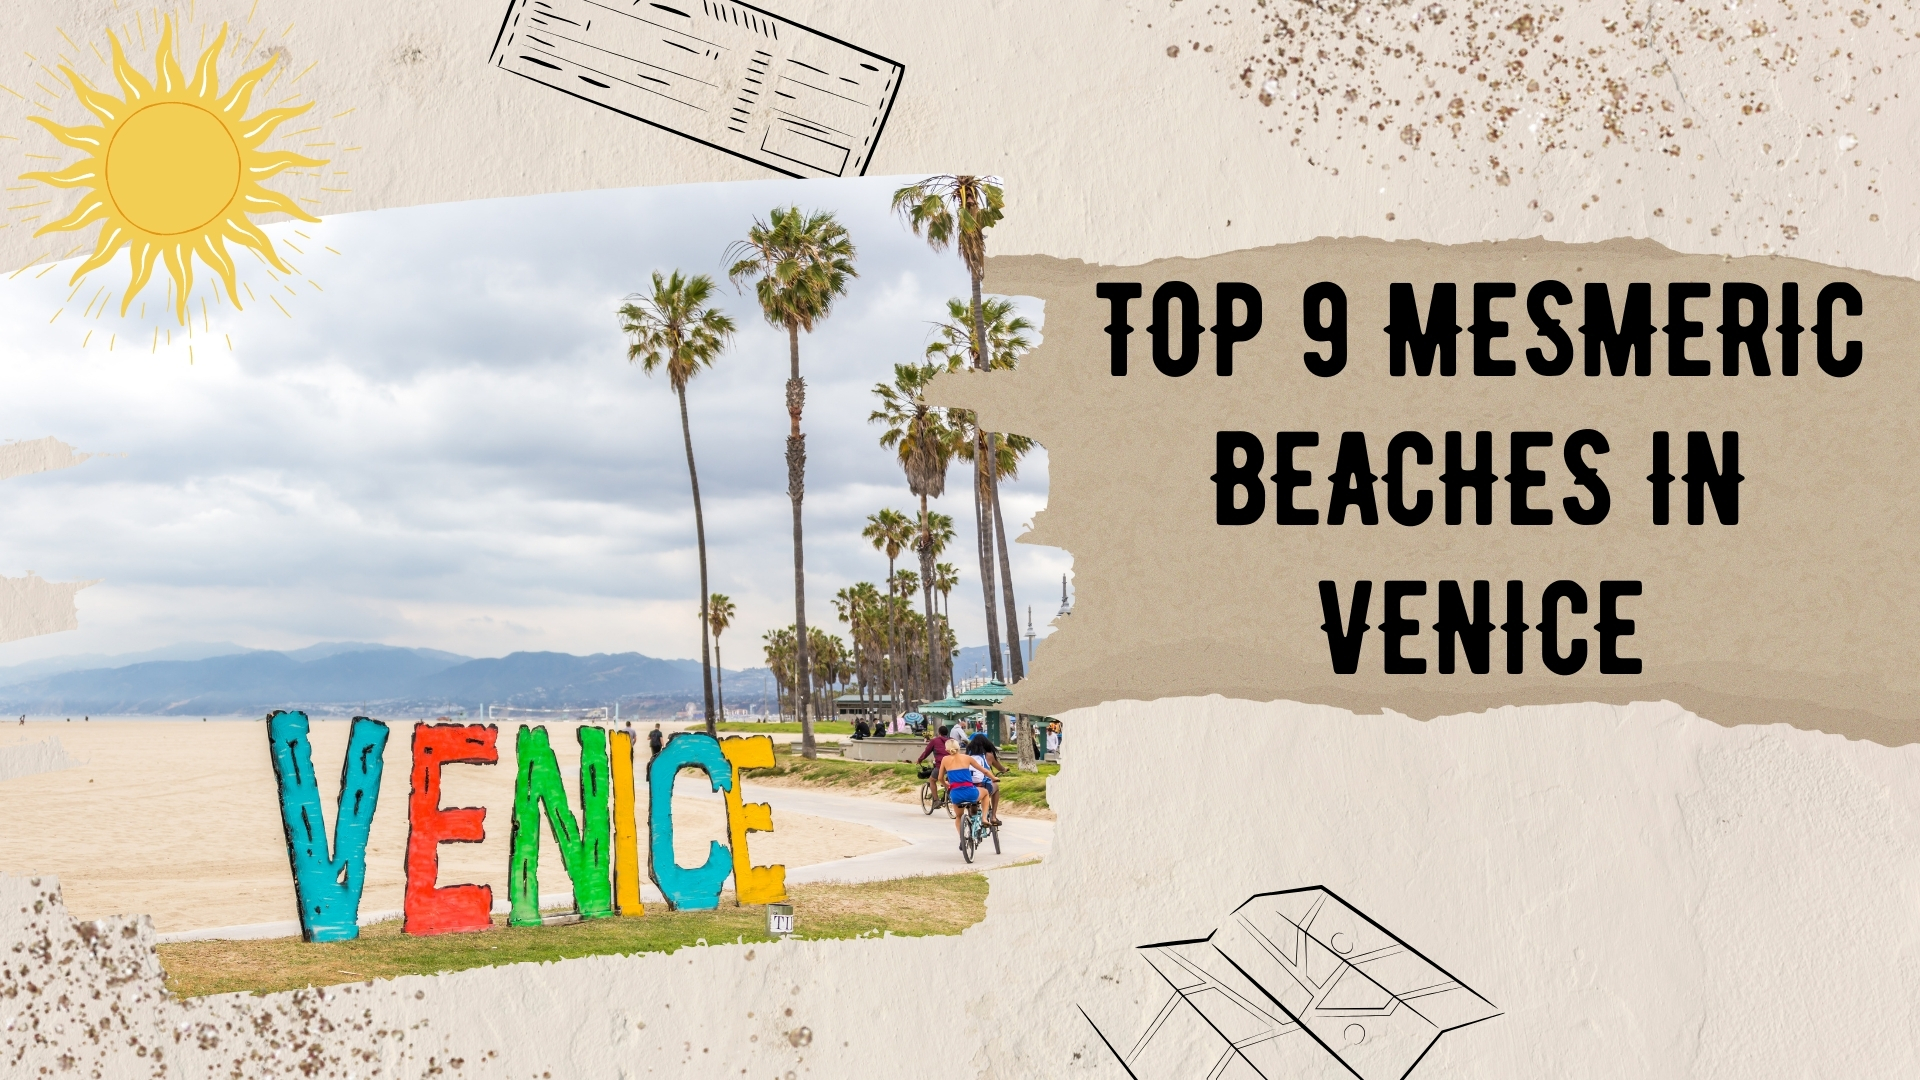 Top 9 Mesmeric Beaches In Venice For An Amazing Beach Vacation